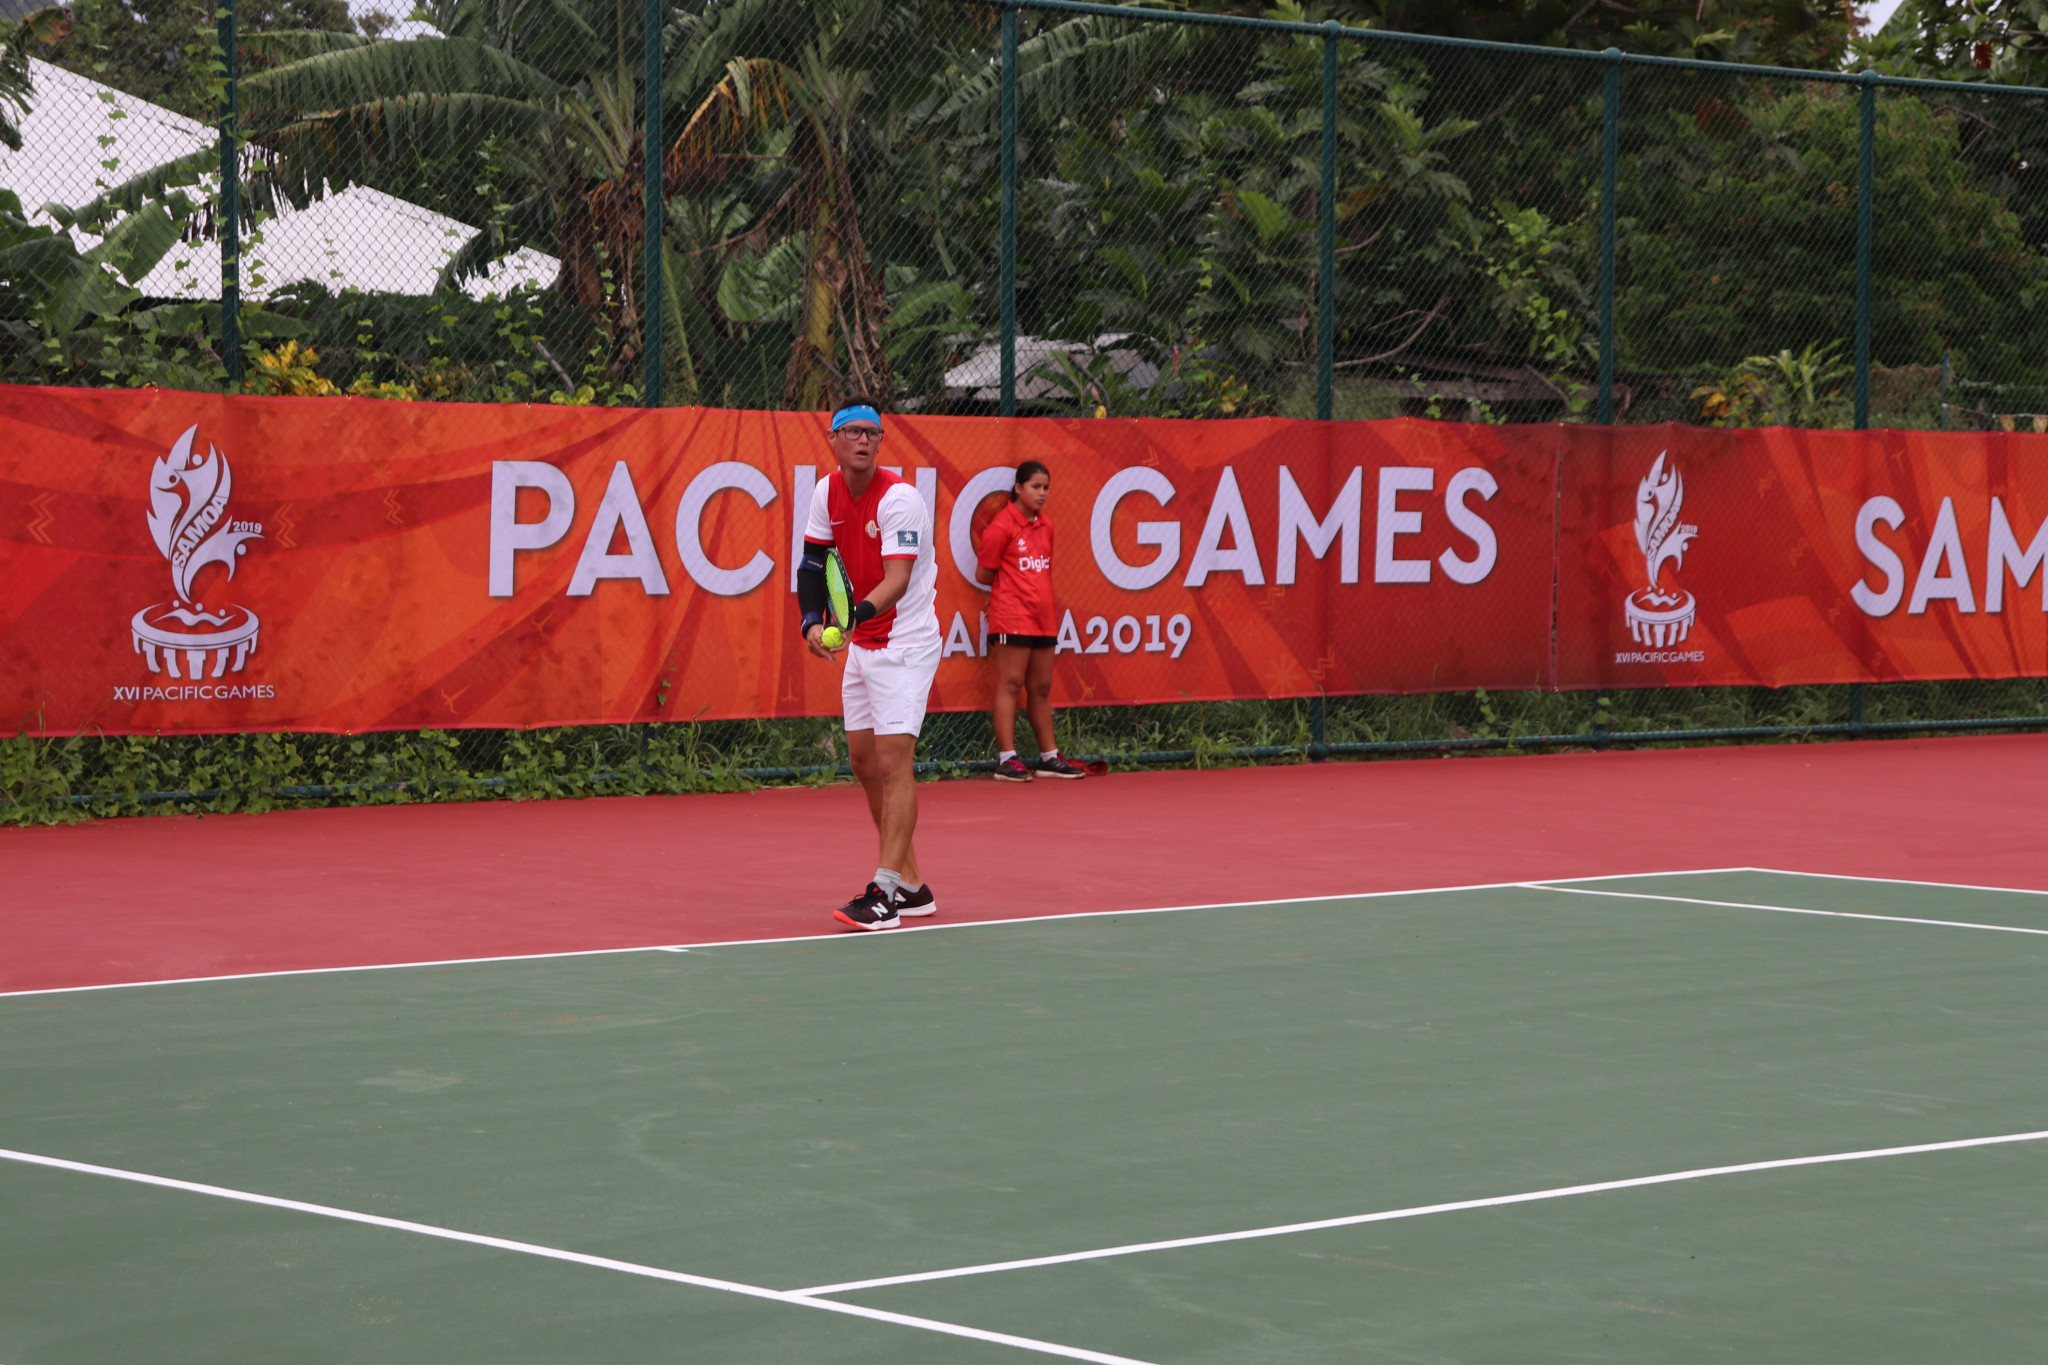 The preliminary stages of tennis competition began ©Samoa 2019